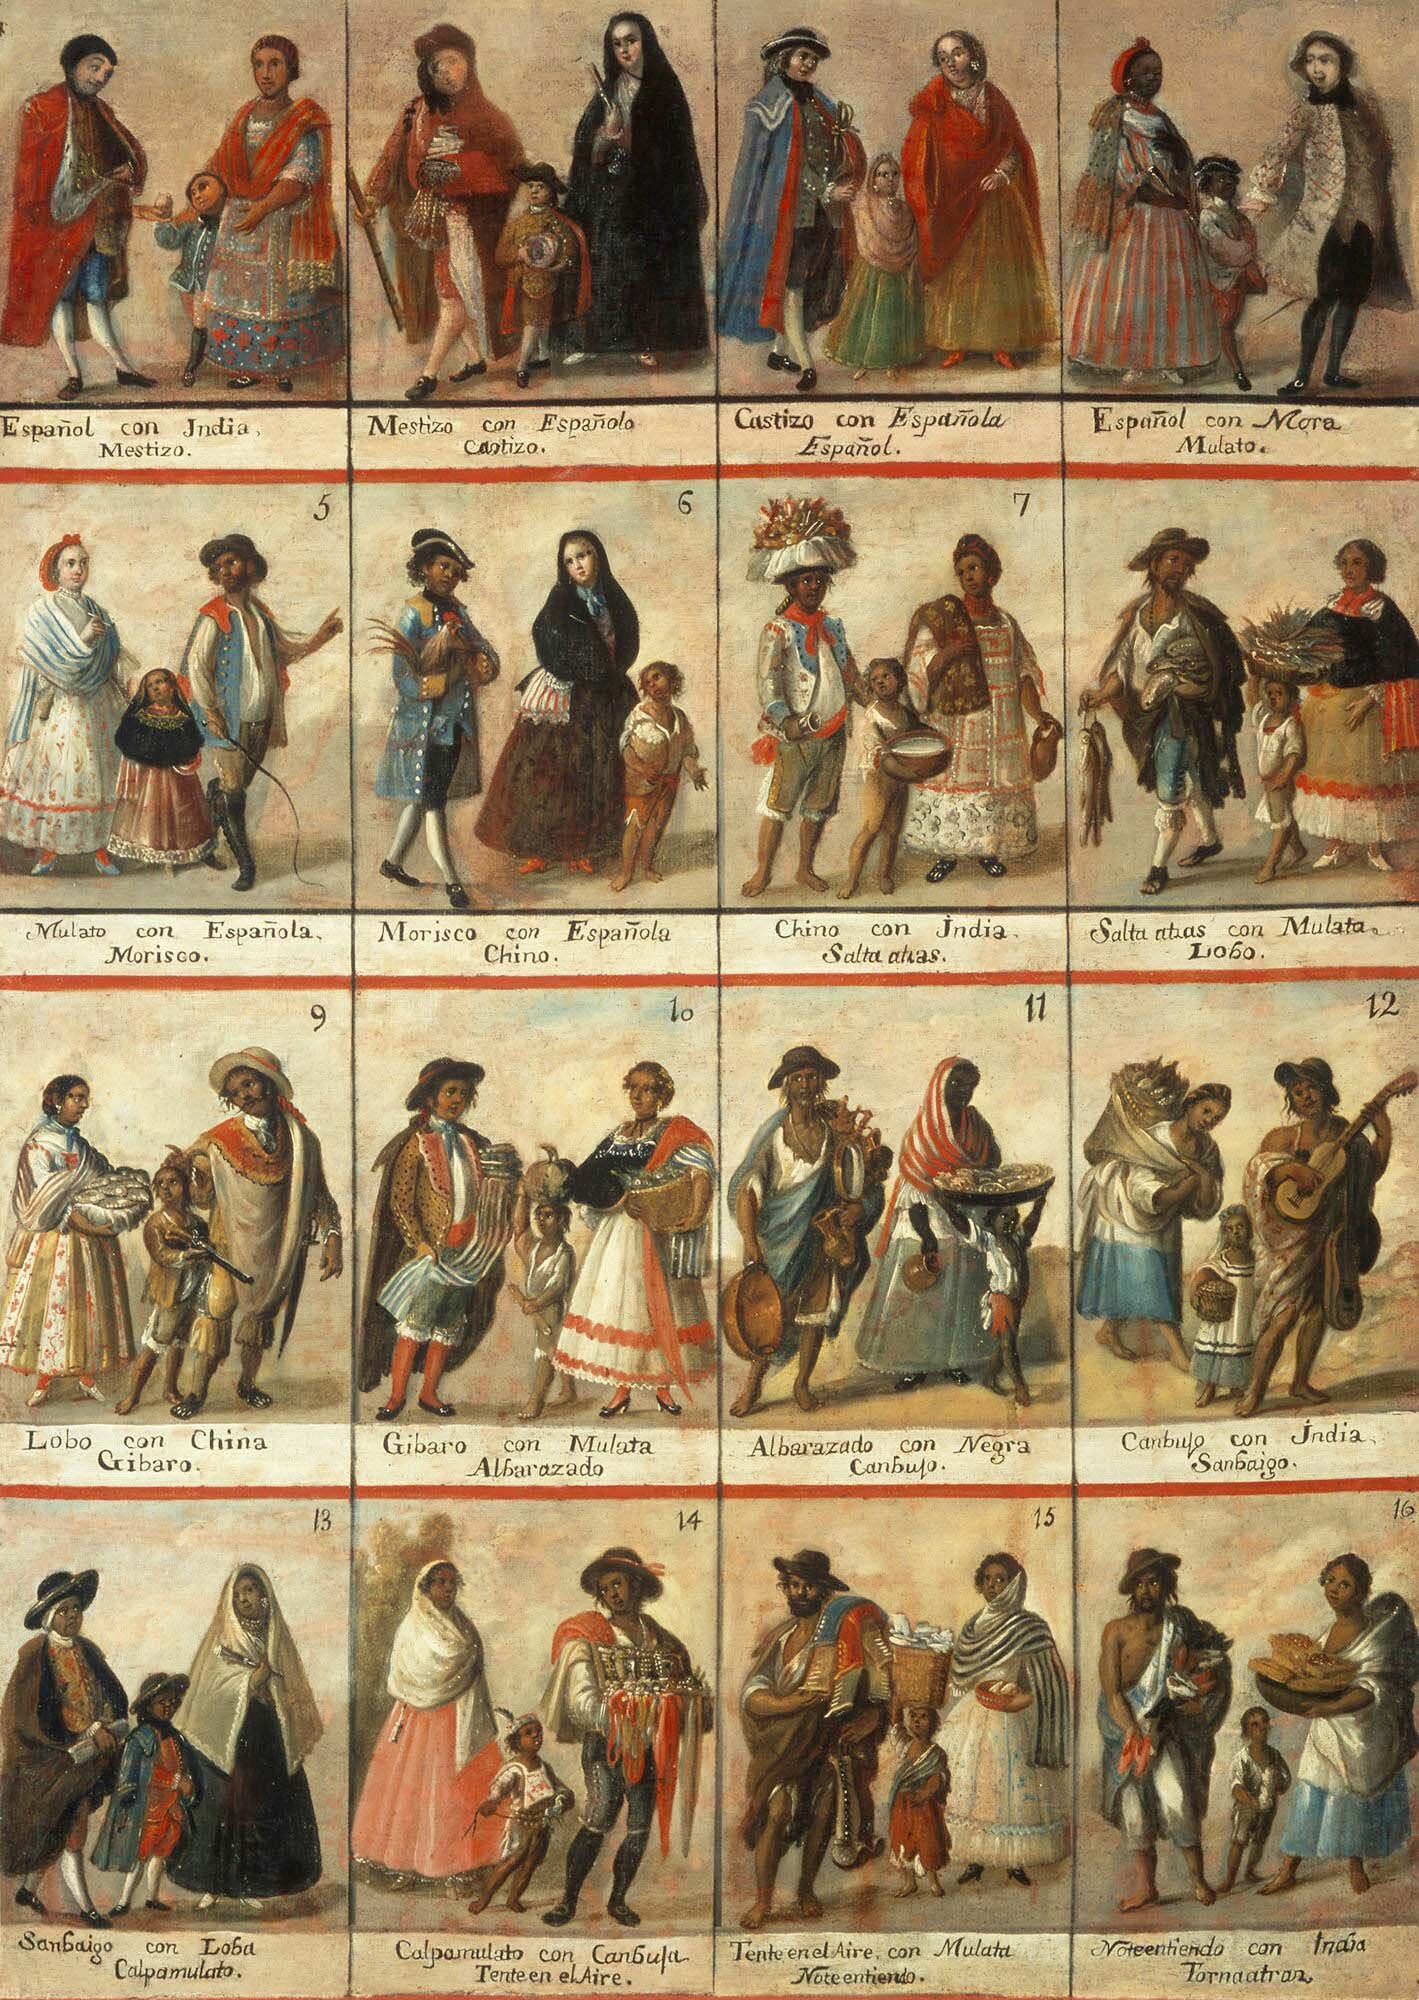 Las Castas, Unknown Author, Public domain, via Wikimedia Commons. Casta painting showing 16 racial groupings. Anonymous, 18th century, oil on canvas, 148×104 cm, Museo Nacional del Virreinato, Tepotzotlán, Mexico. There are 4 rows of paintings. Each painting shows a man, woman, and child wearing different garments. Every person has a different skin tone.